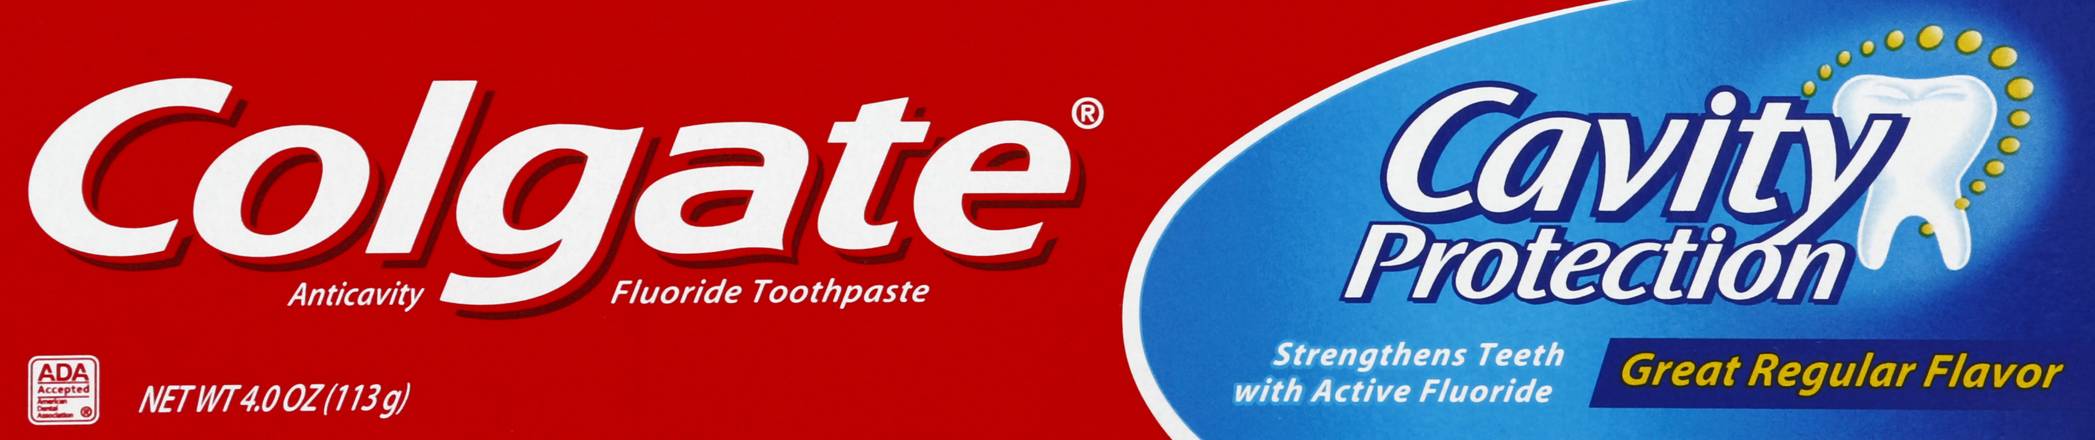 Colgate Cavity Protection Regular Flavor Toothpaste